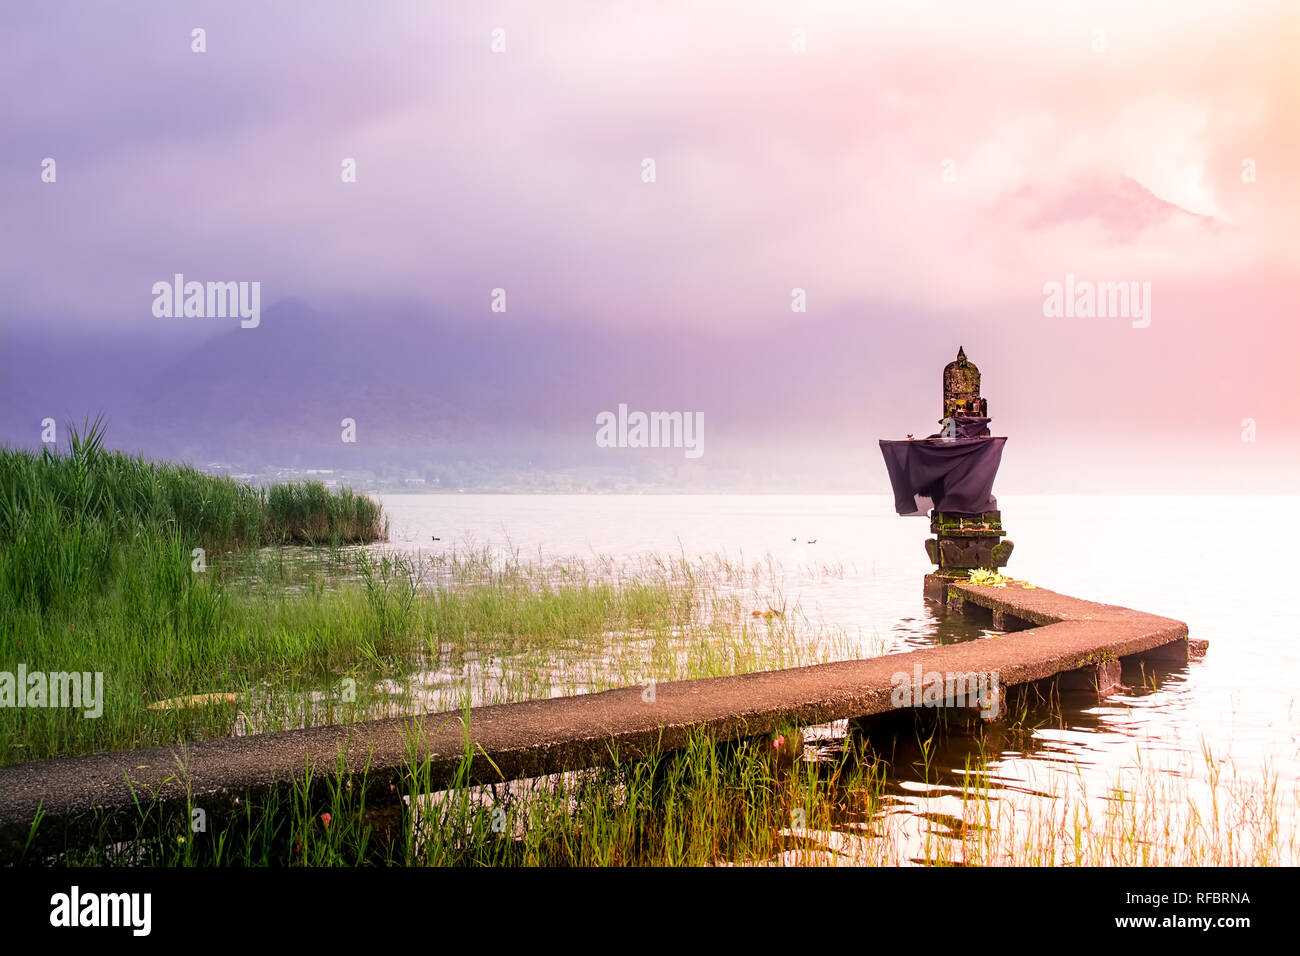 Small Hindu Temple on The Lake Side With Connecting Bridge During Sunrise in Bali on Cloudy and Misty Day with Mountain as Background. Stock Photo